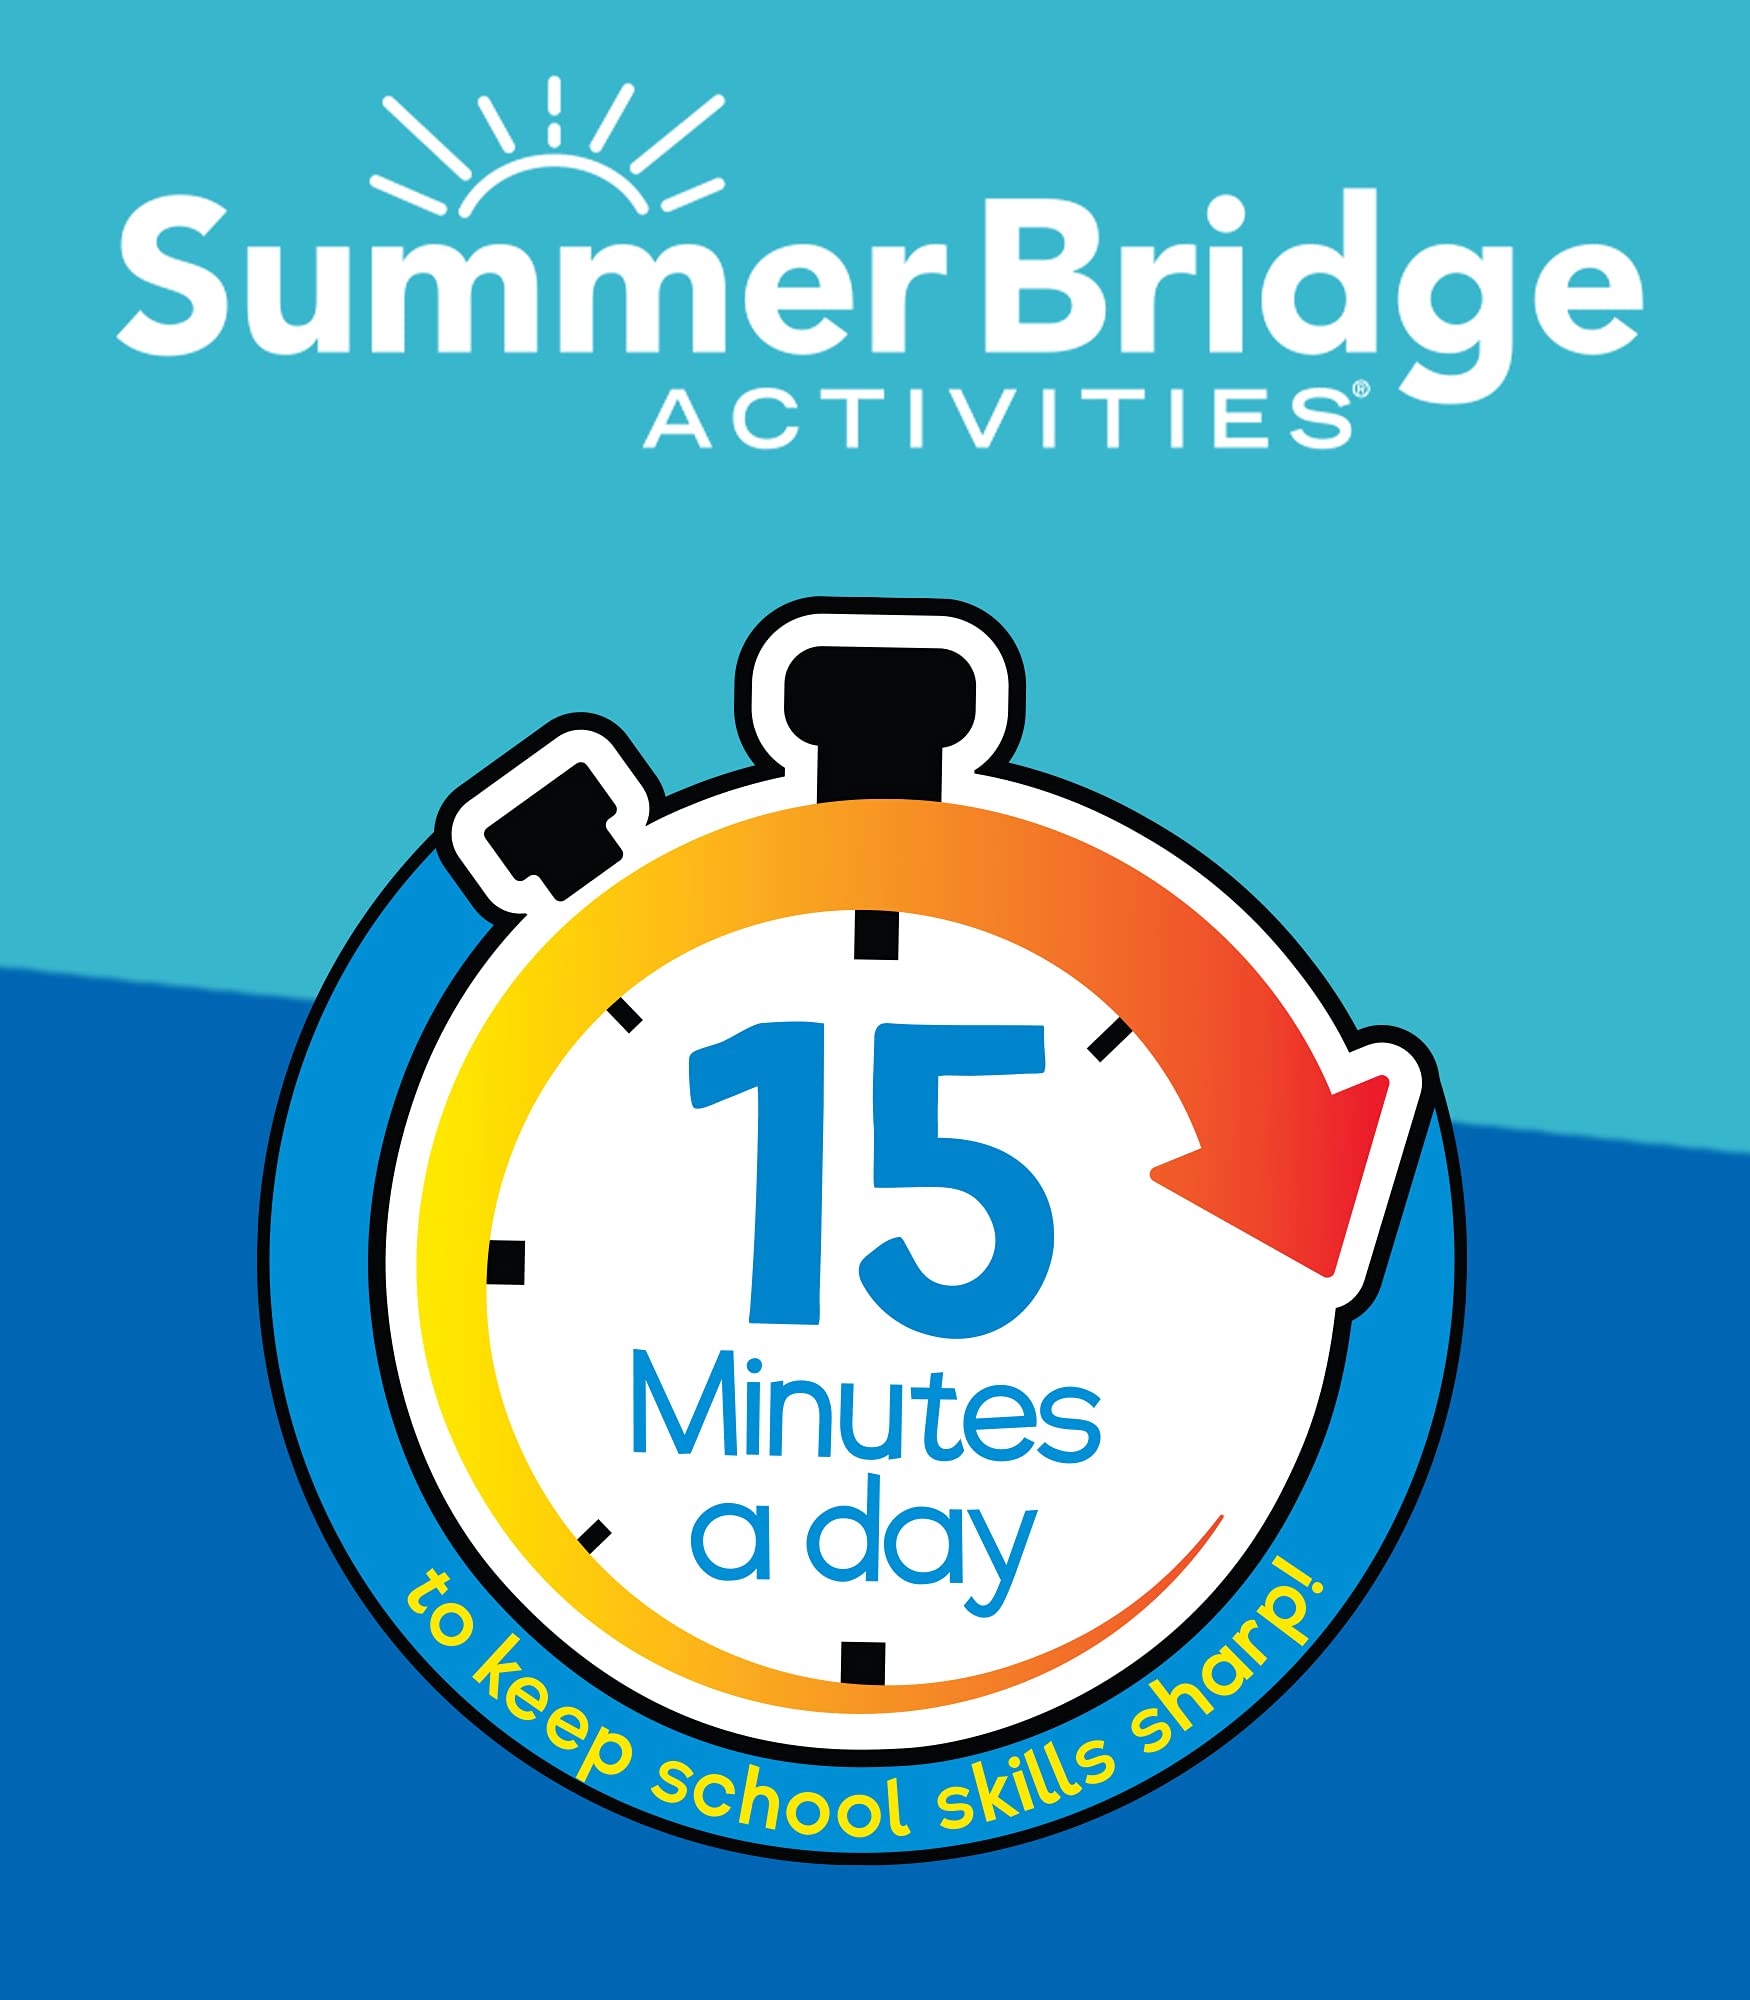 Summer Bridge Activities 3rd to 4th Grade Workbook, Math, Reading Comprehension, Writing, Science, Social Studies, Fitness Summer Learning Activities, 4th Grade Workbooks All Subjects With Flash Cards